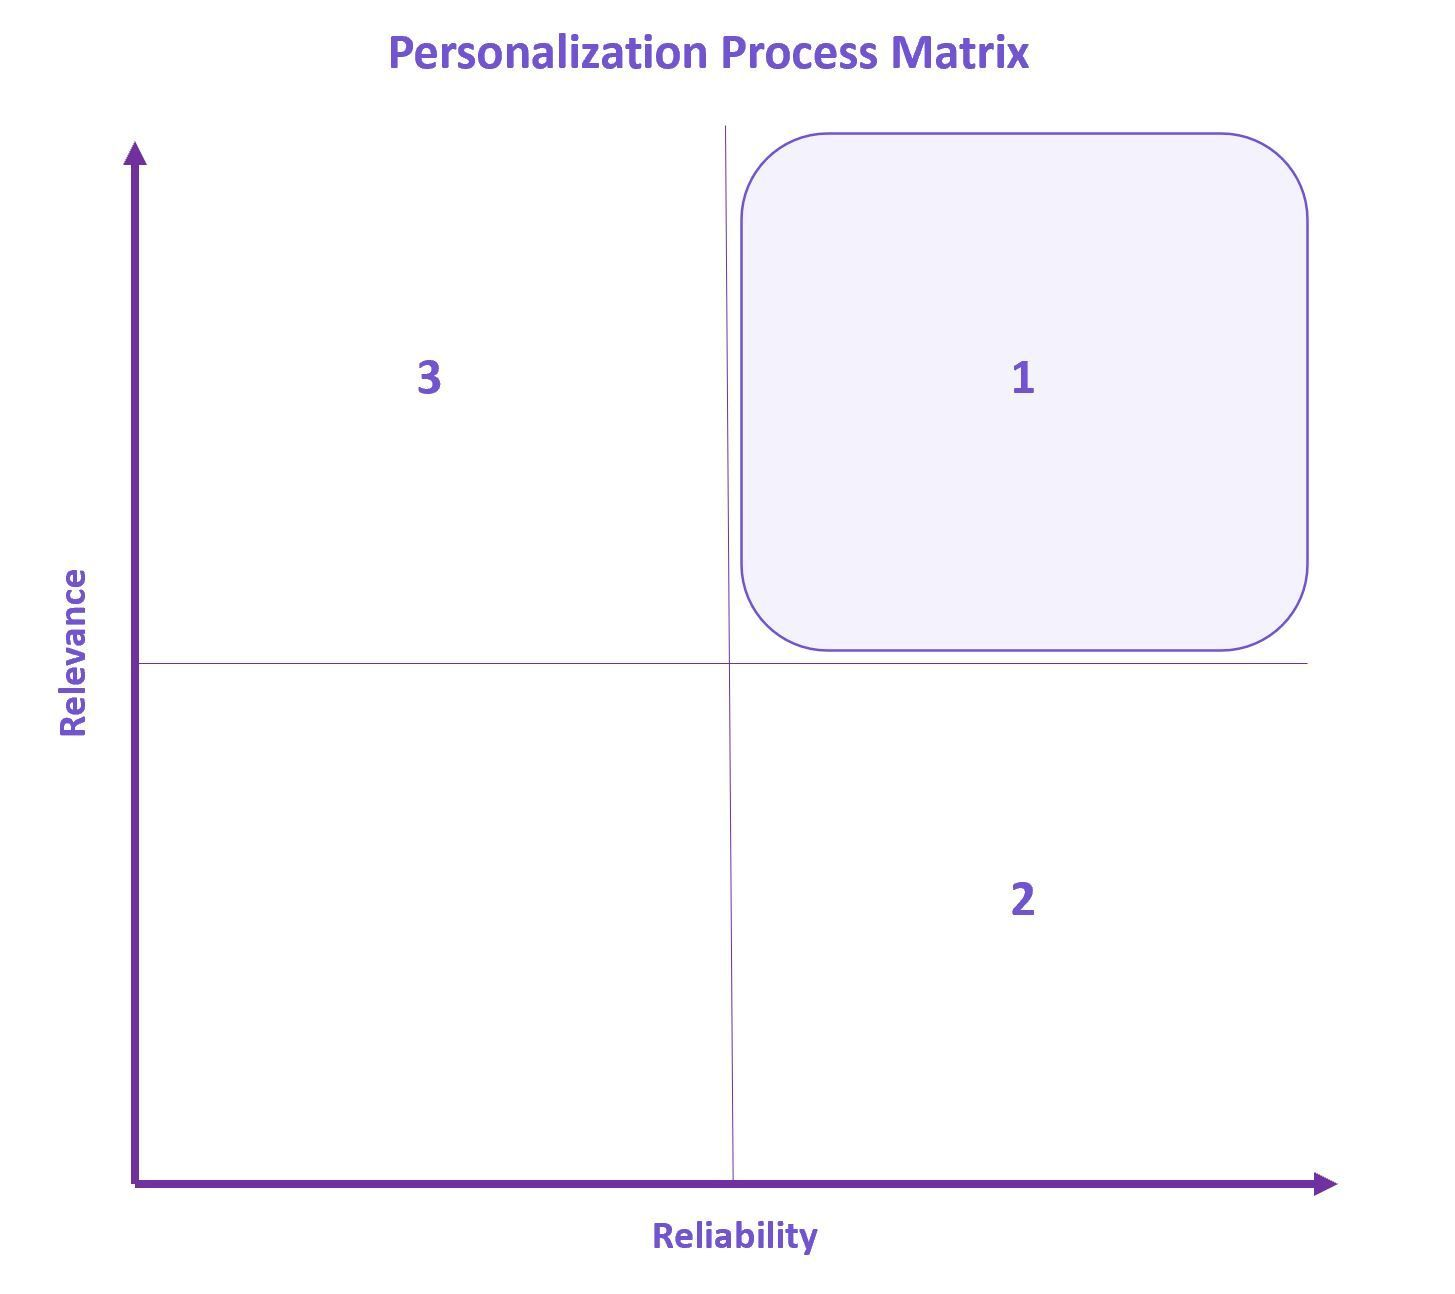 Personalization Process Matrix charts a number "one" as the most reliable and most relevant, a number "two" as the most reliable but less relevant, and a number "three" as the most relevant but less reliable.